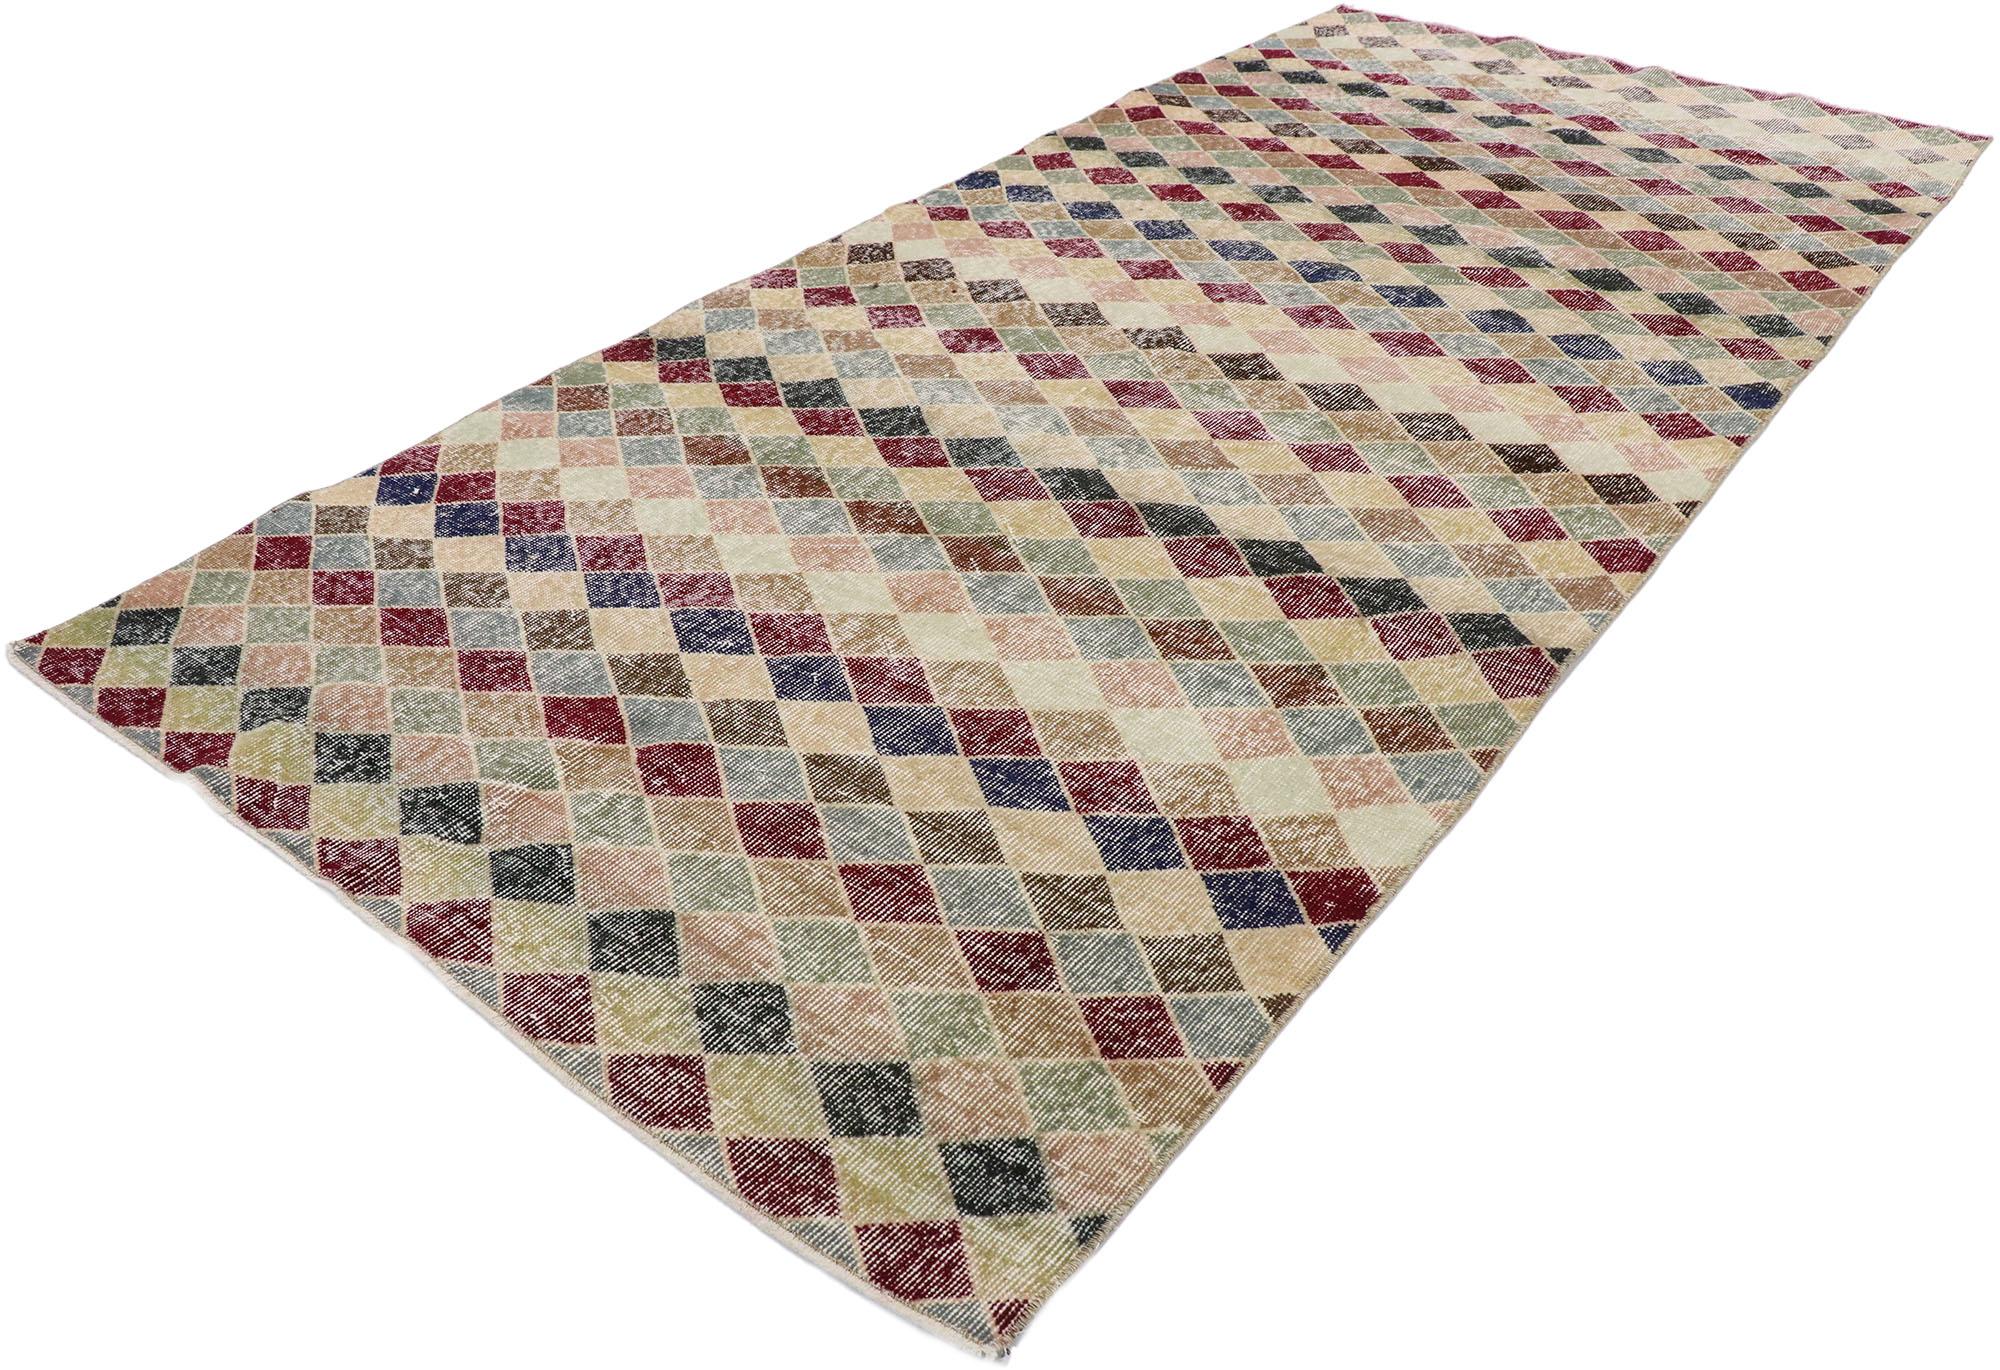 53292 distressed vintage Turkish Sivas rug with Rustic Mid-Century Modern style. This hand knotted wool distressed vintage Turkish Sivas rug features an all-over checkerboard repeating lozenge pattern comprised of repetitive multicolored diamonds.